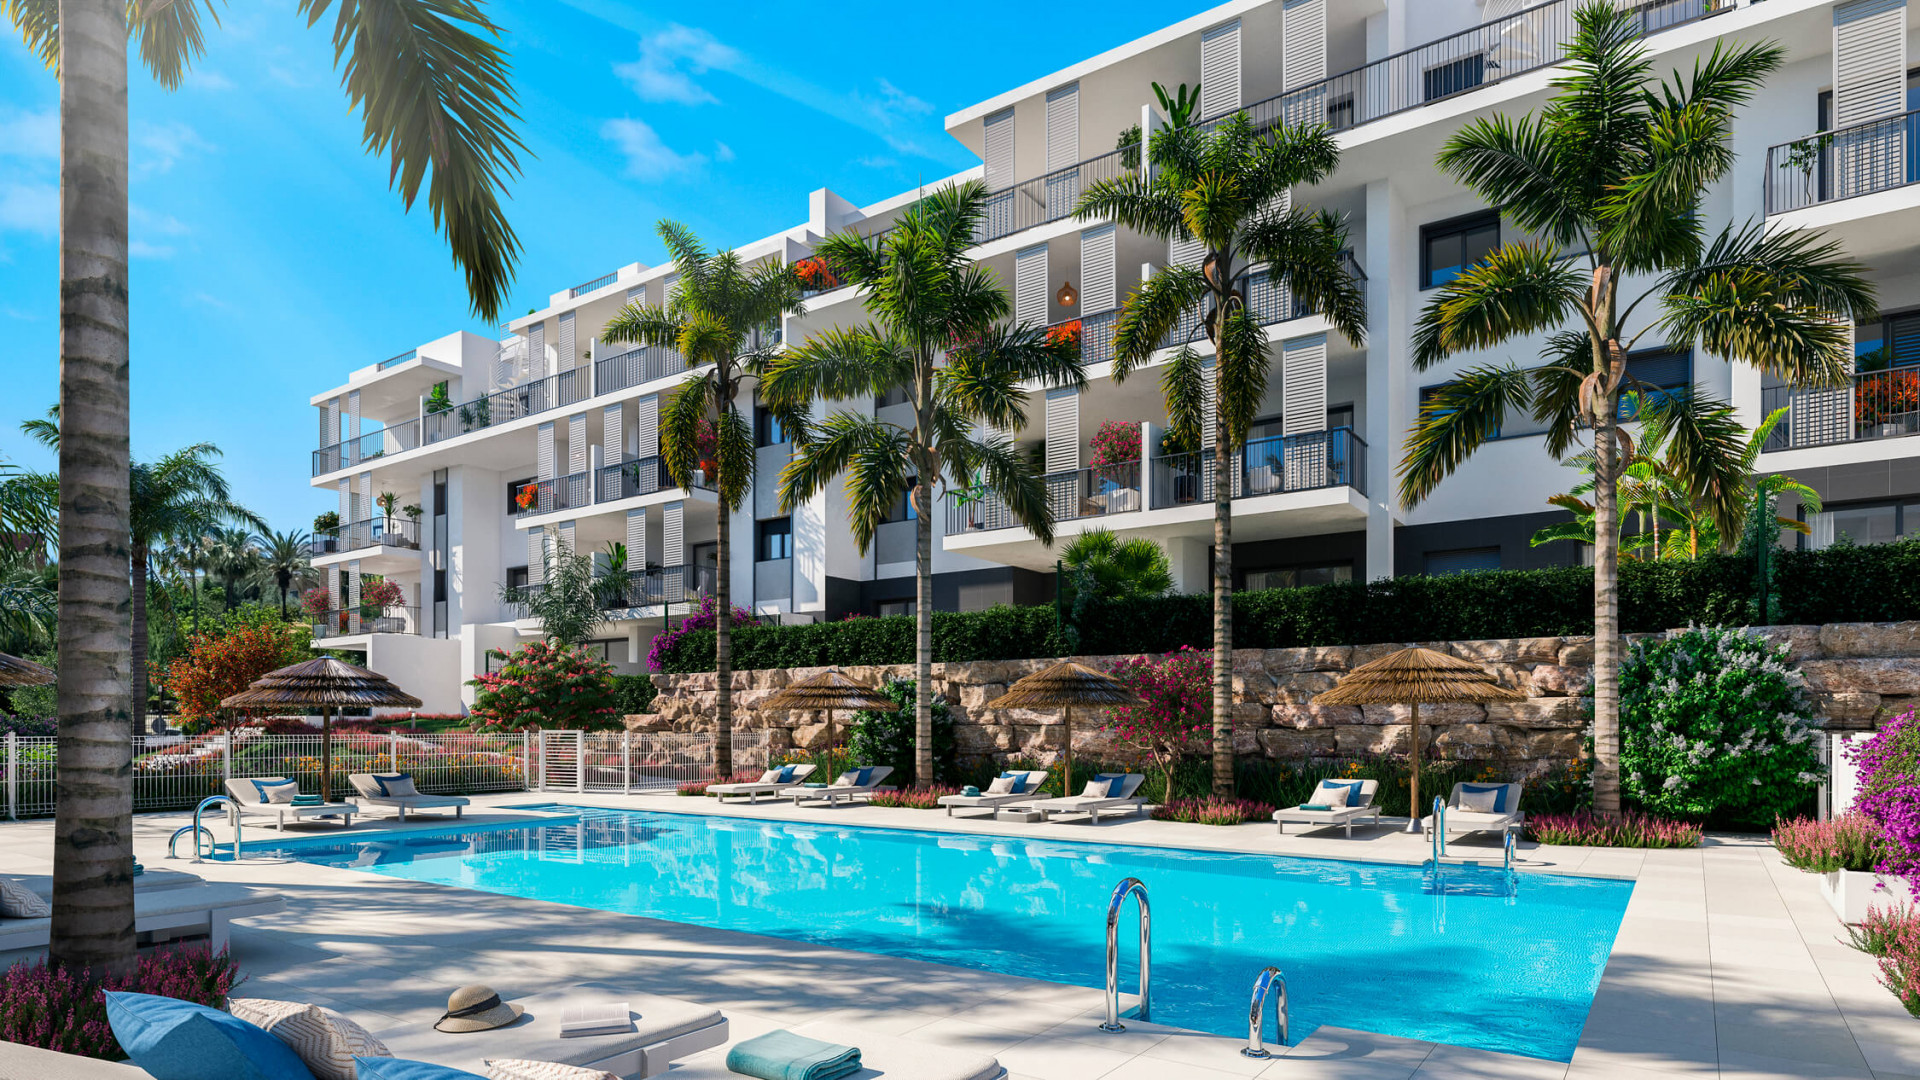 Off plan modern apartments in Estepona downtown for sale – Estepona